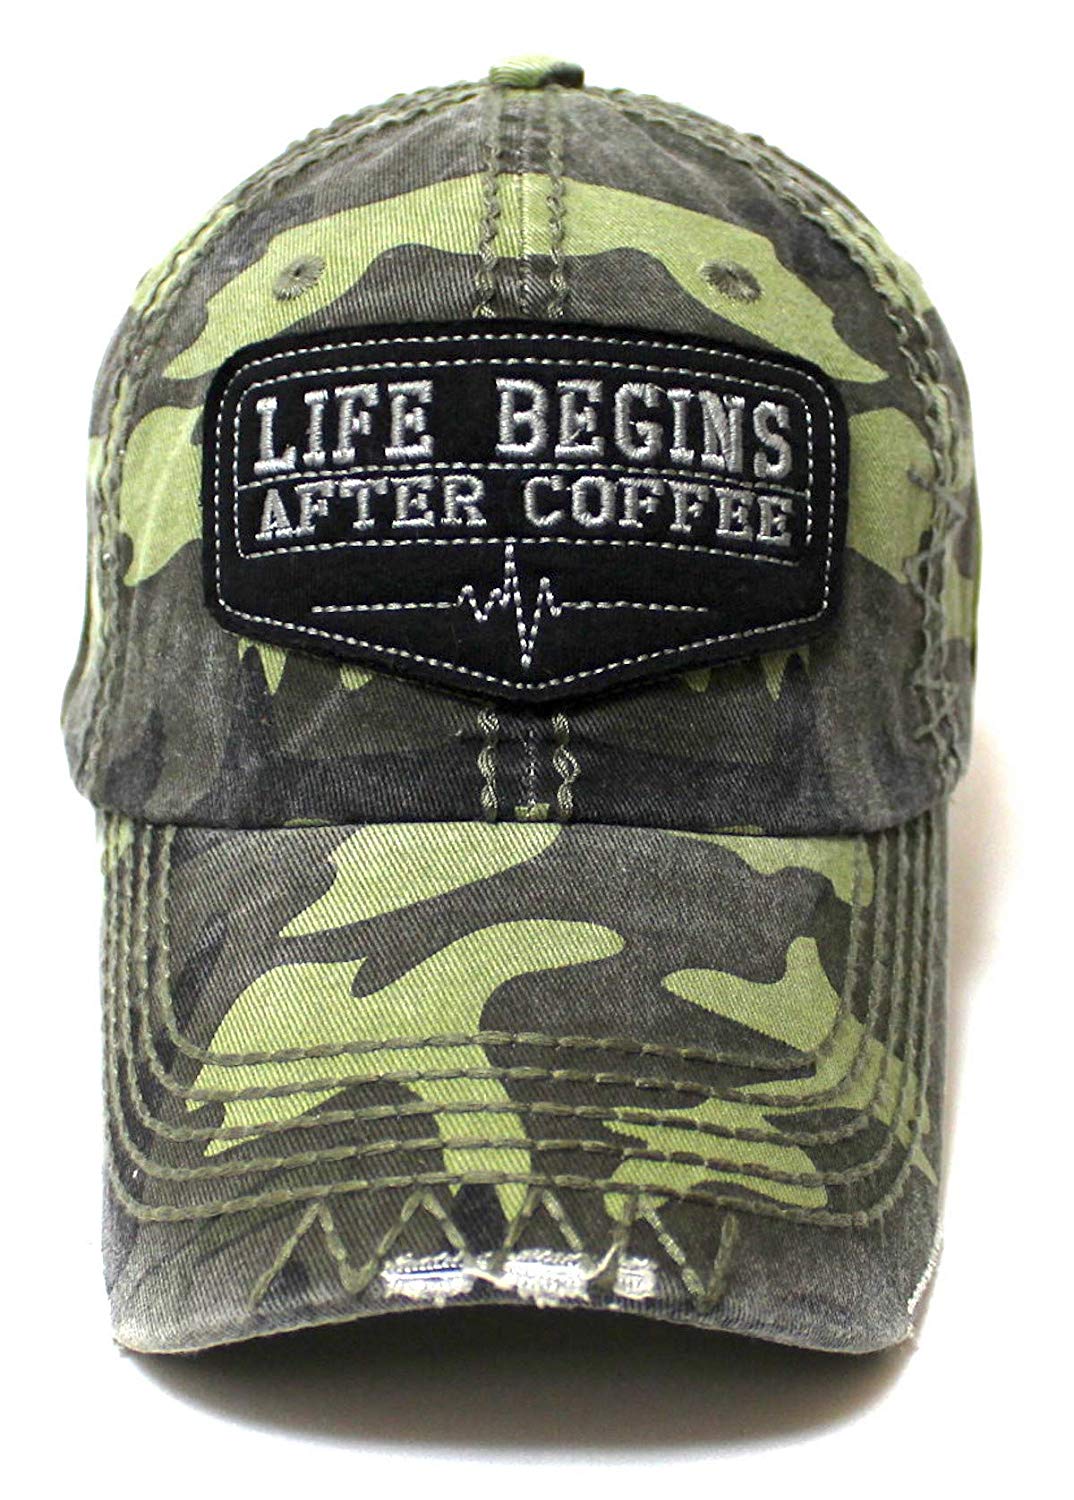 Classic Varsity Ball Cap Life Begins After Coffee Patch Embroidery Hat, Army Camoflauge - Caps 'N Vintage 